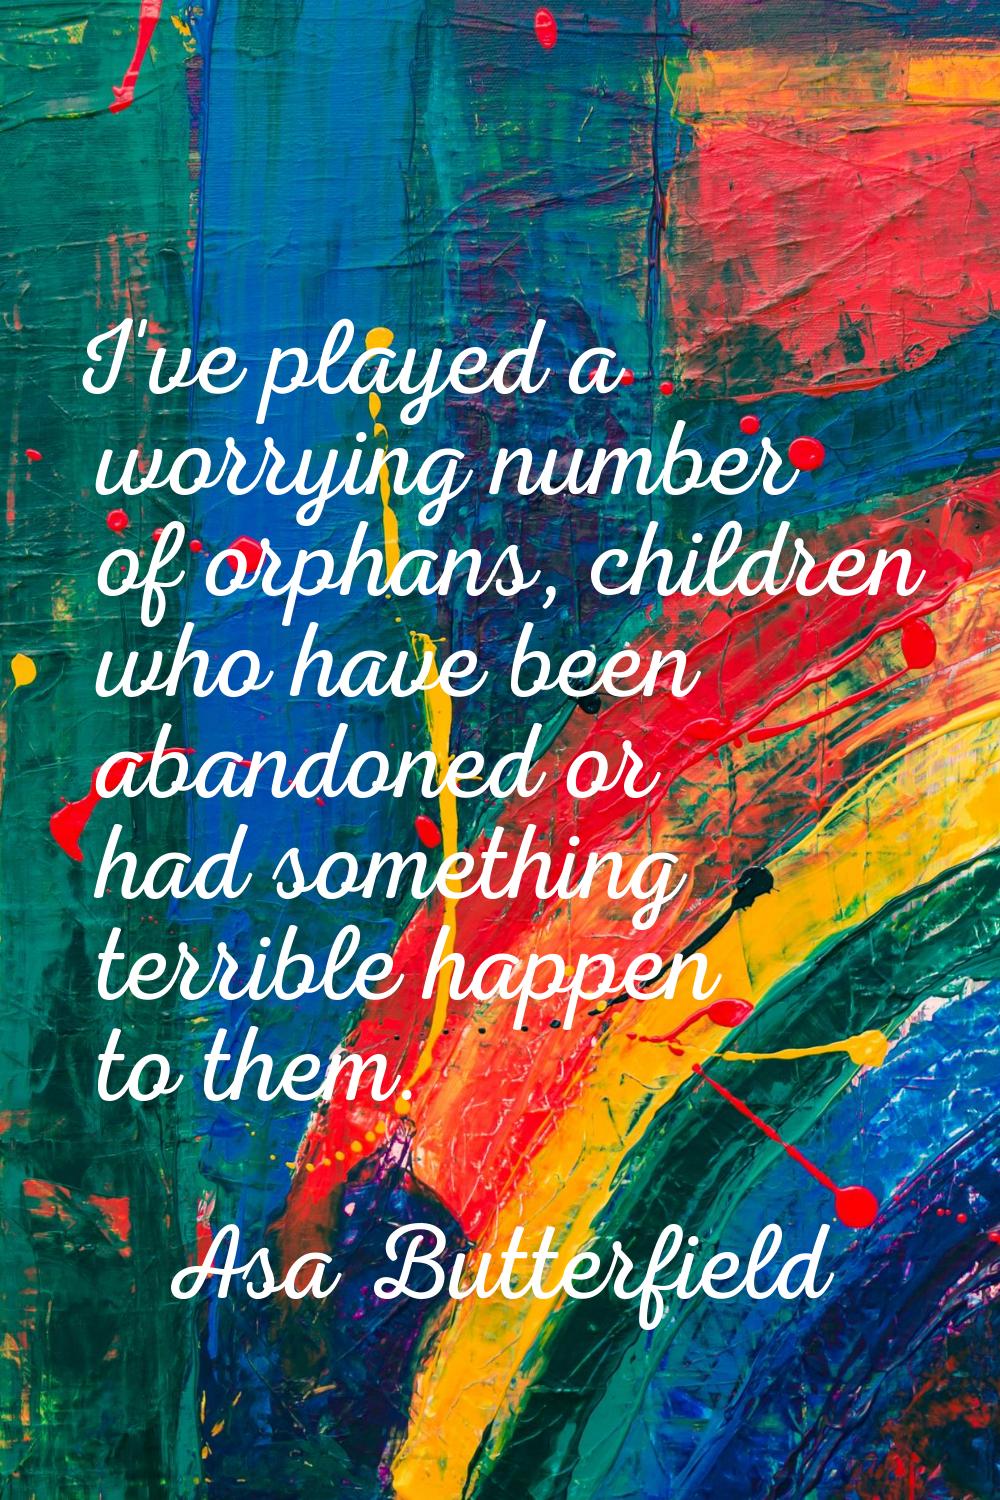 I've played a worrying number of orphans, children who have been abandoned or had something terribl